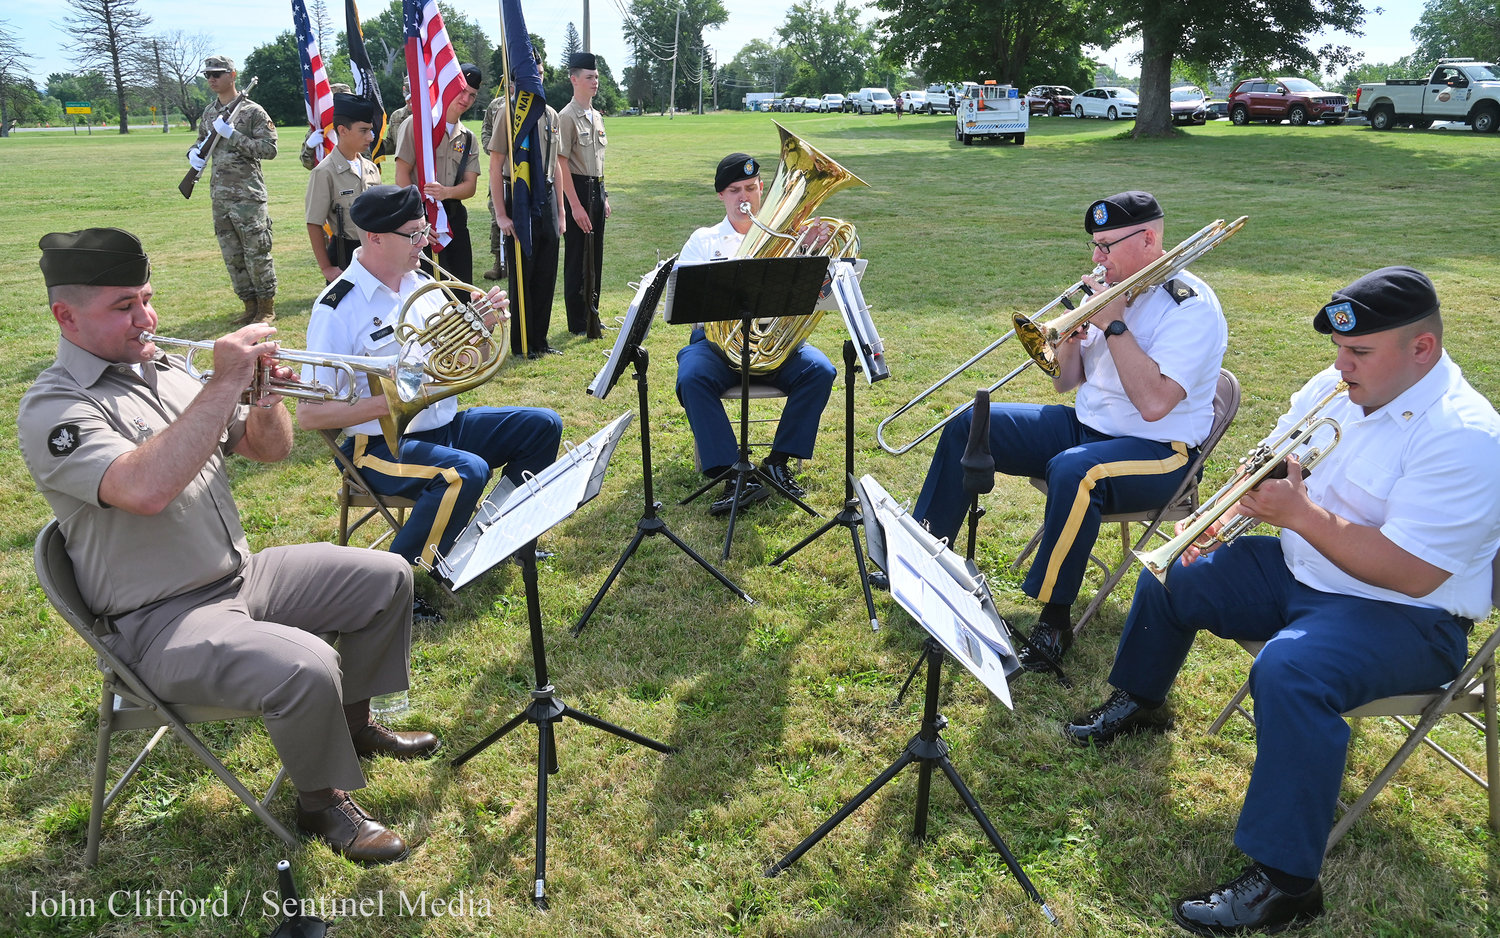 The 10th Mountain Division band performing before the dedication ceremony.